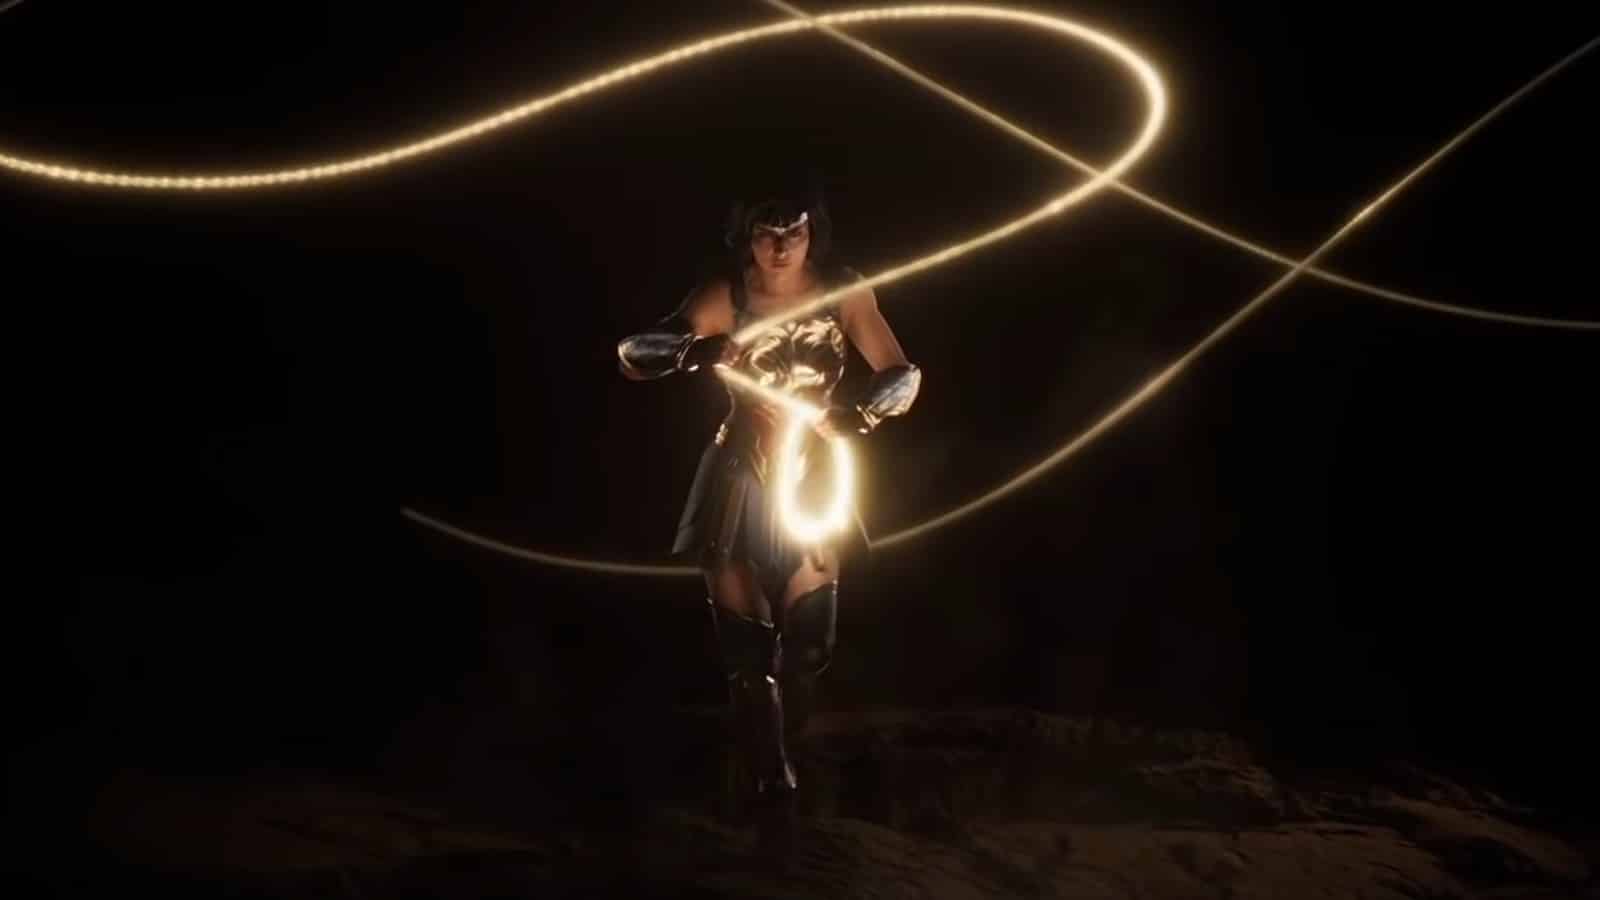 An image of Wonder Woman from the teaser trailer